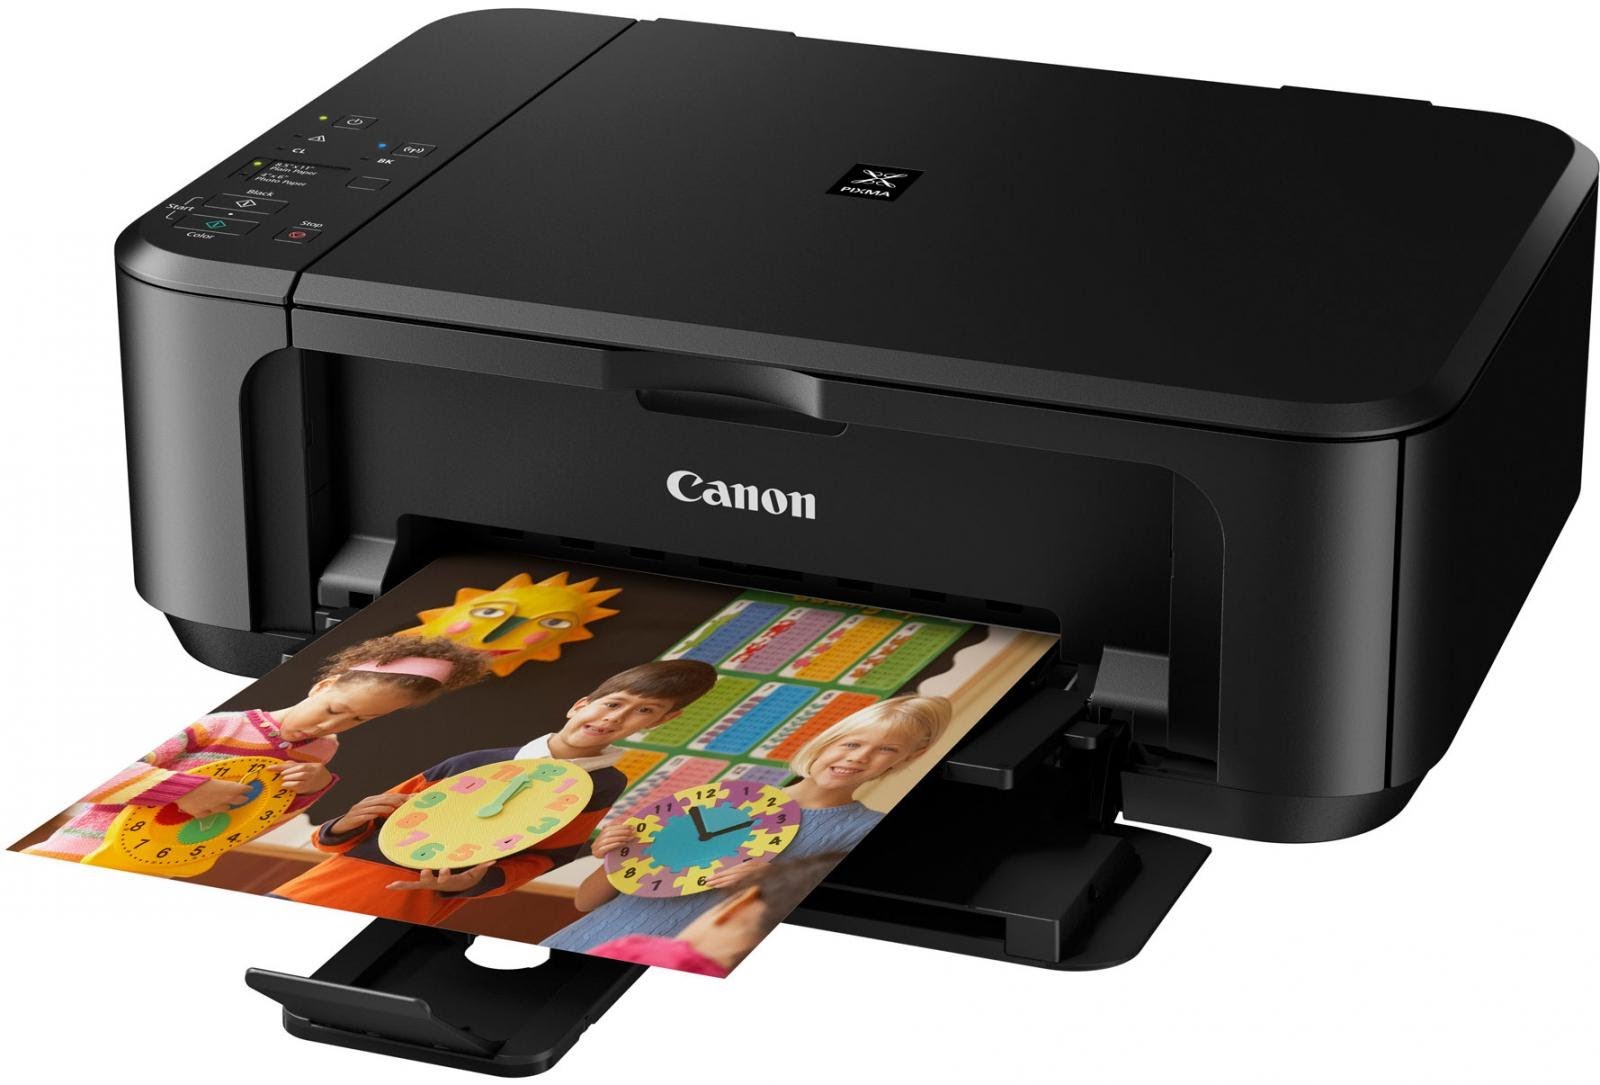 Canon Mp180 Drivers Free Download